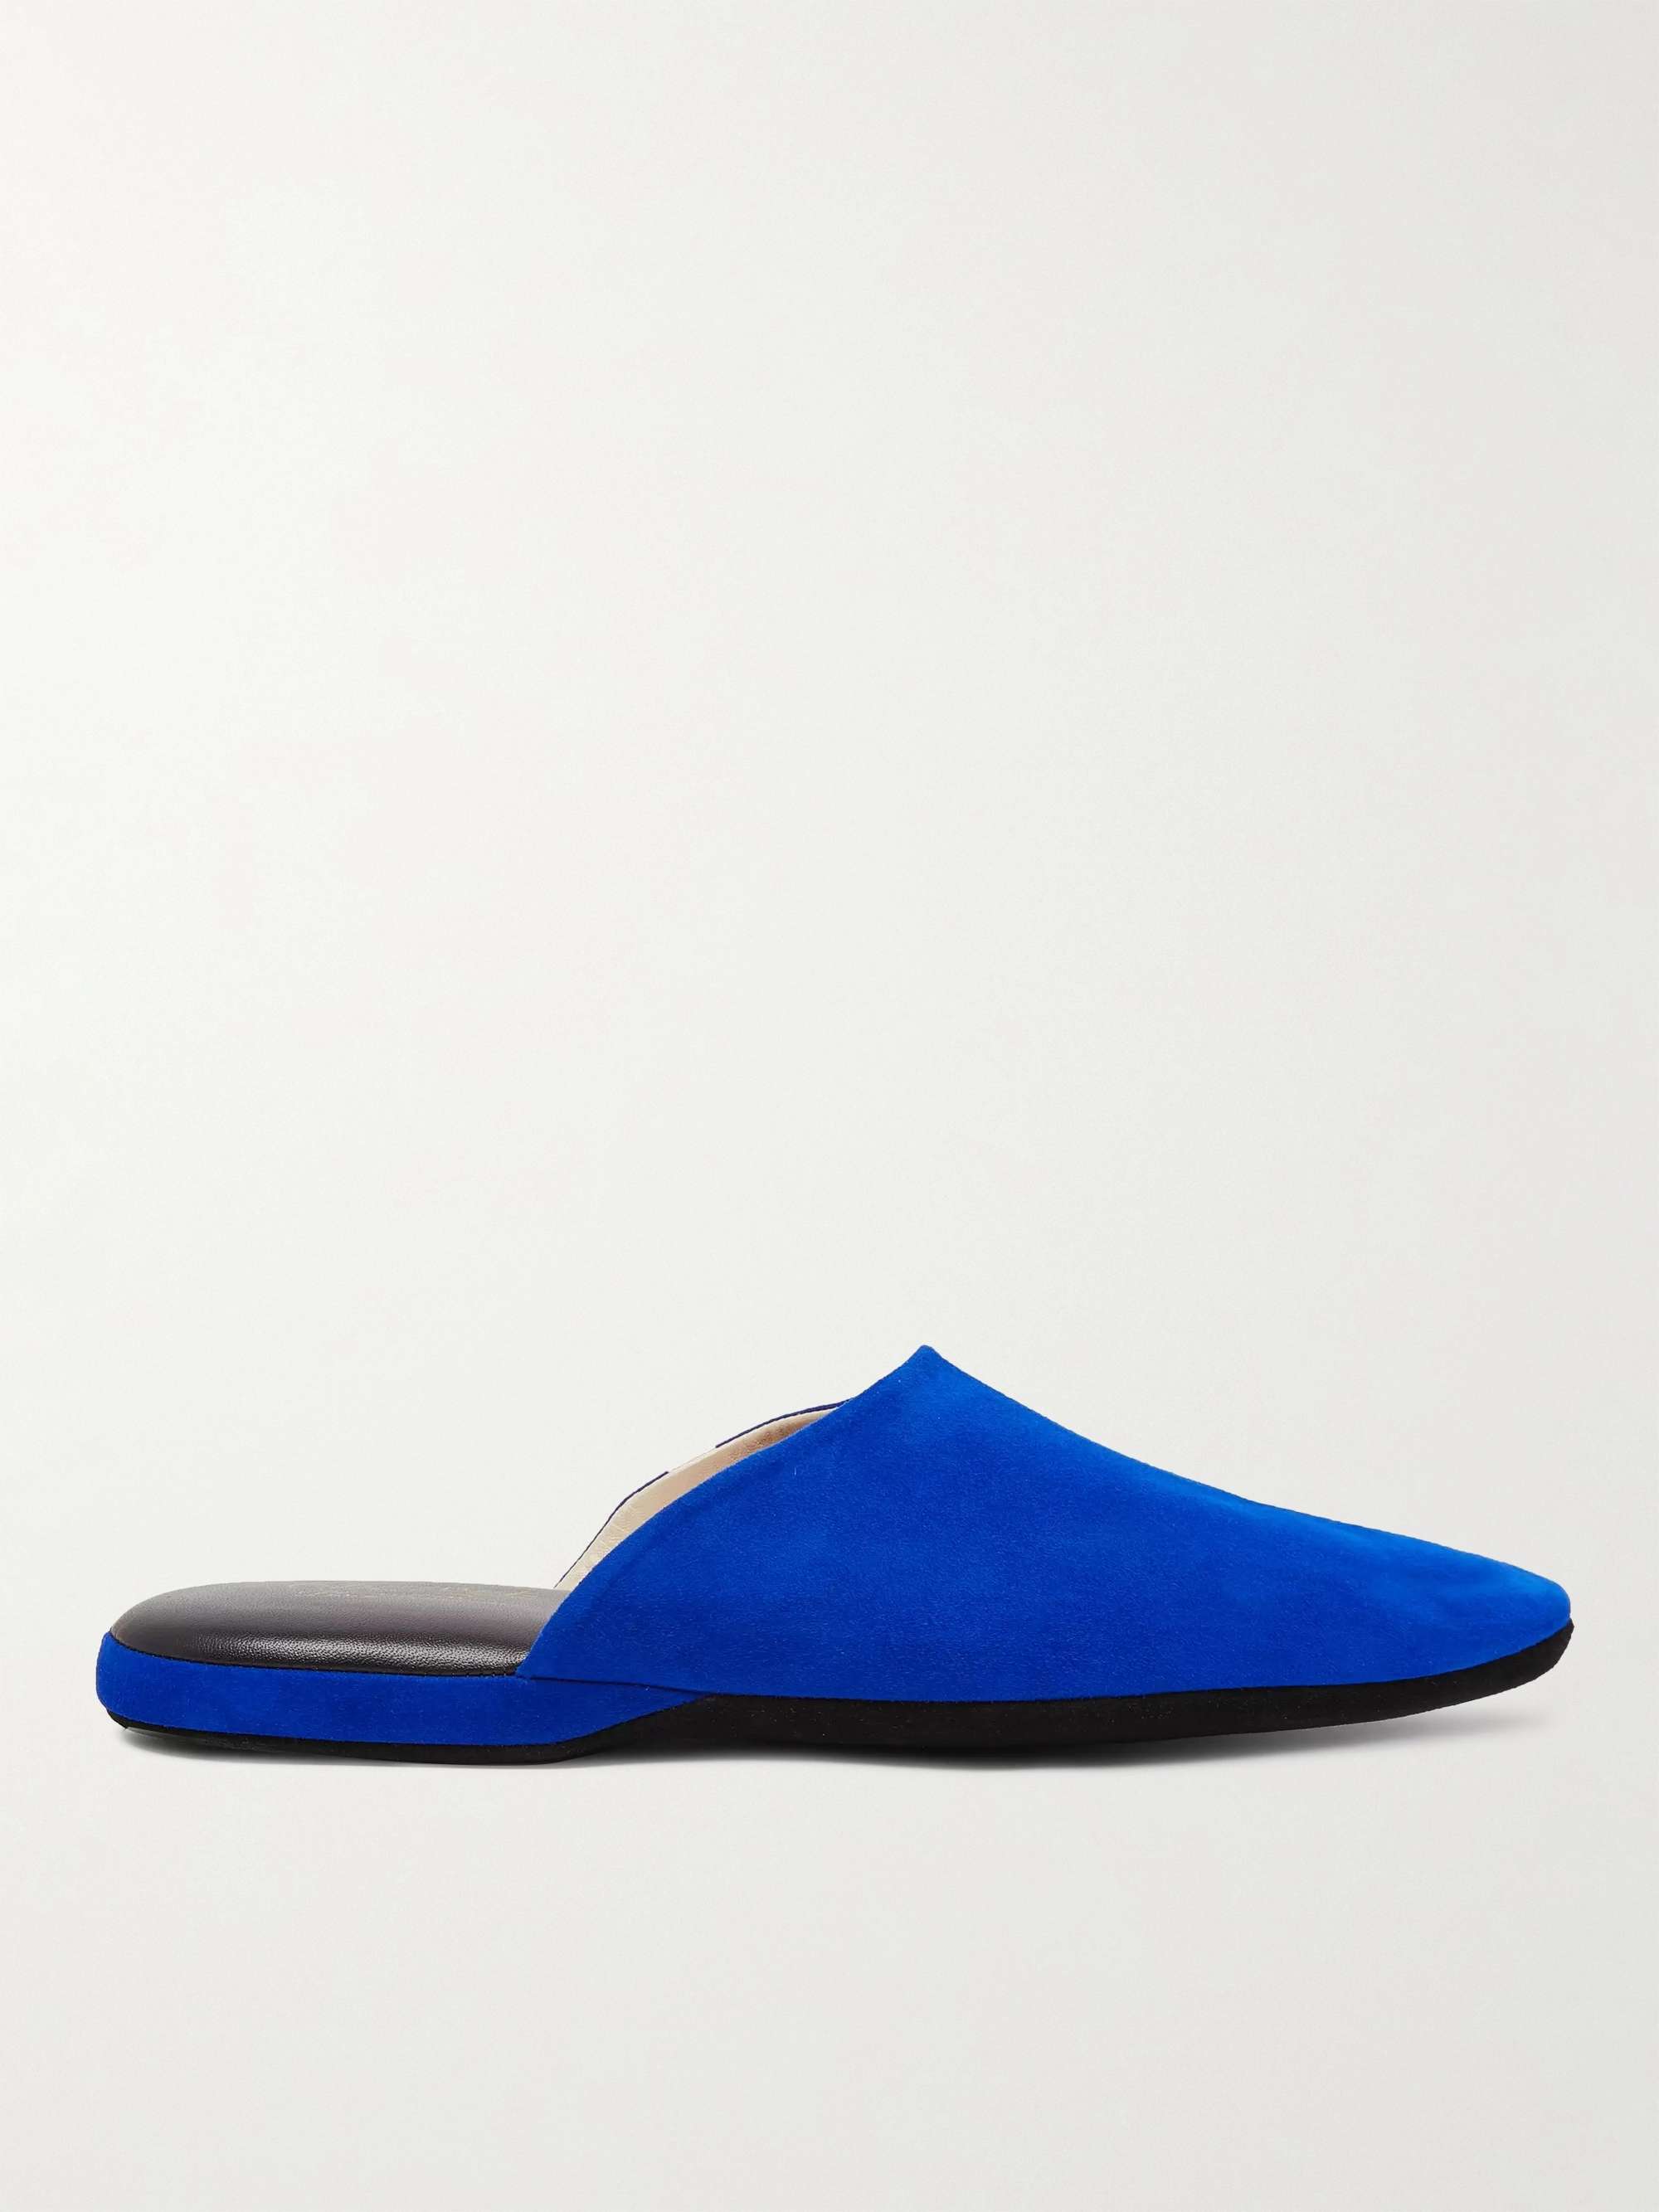 Significance downstairs philosophy CHARVET Suede Slippers for Men | MR PORTER